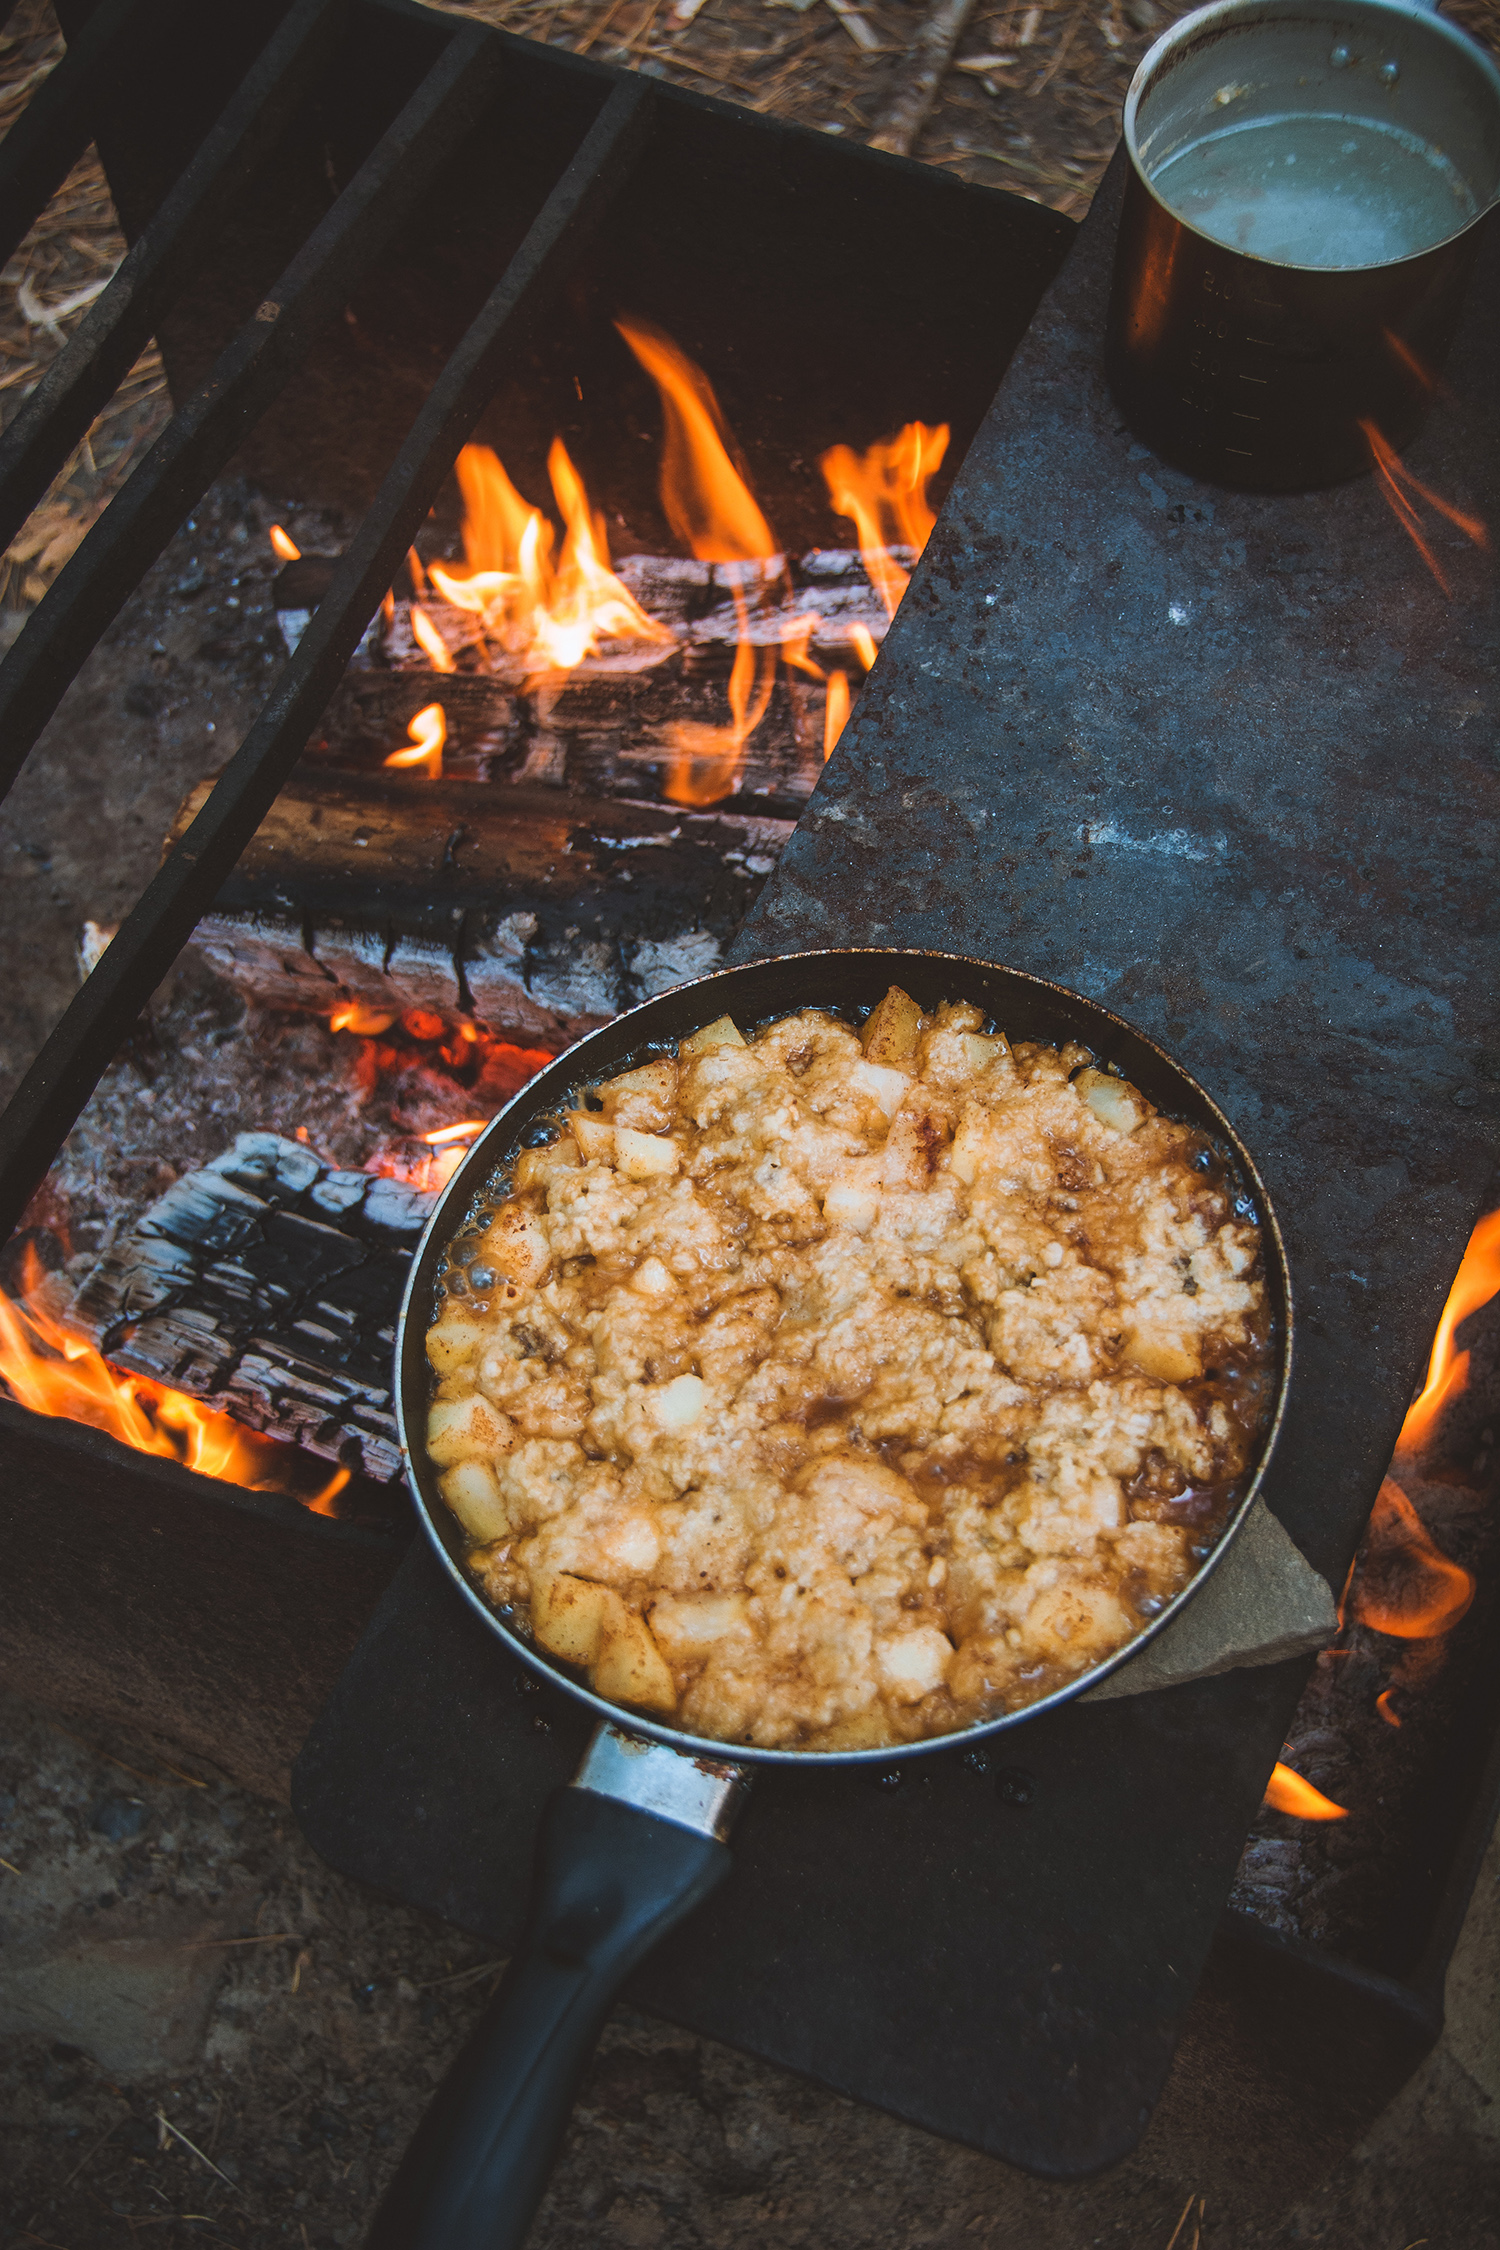 Fall camping guide tip: fires and warm foods help keep the body warm. Here we see an apple crisp baking in a pan on top of a roaring fire.